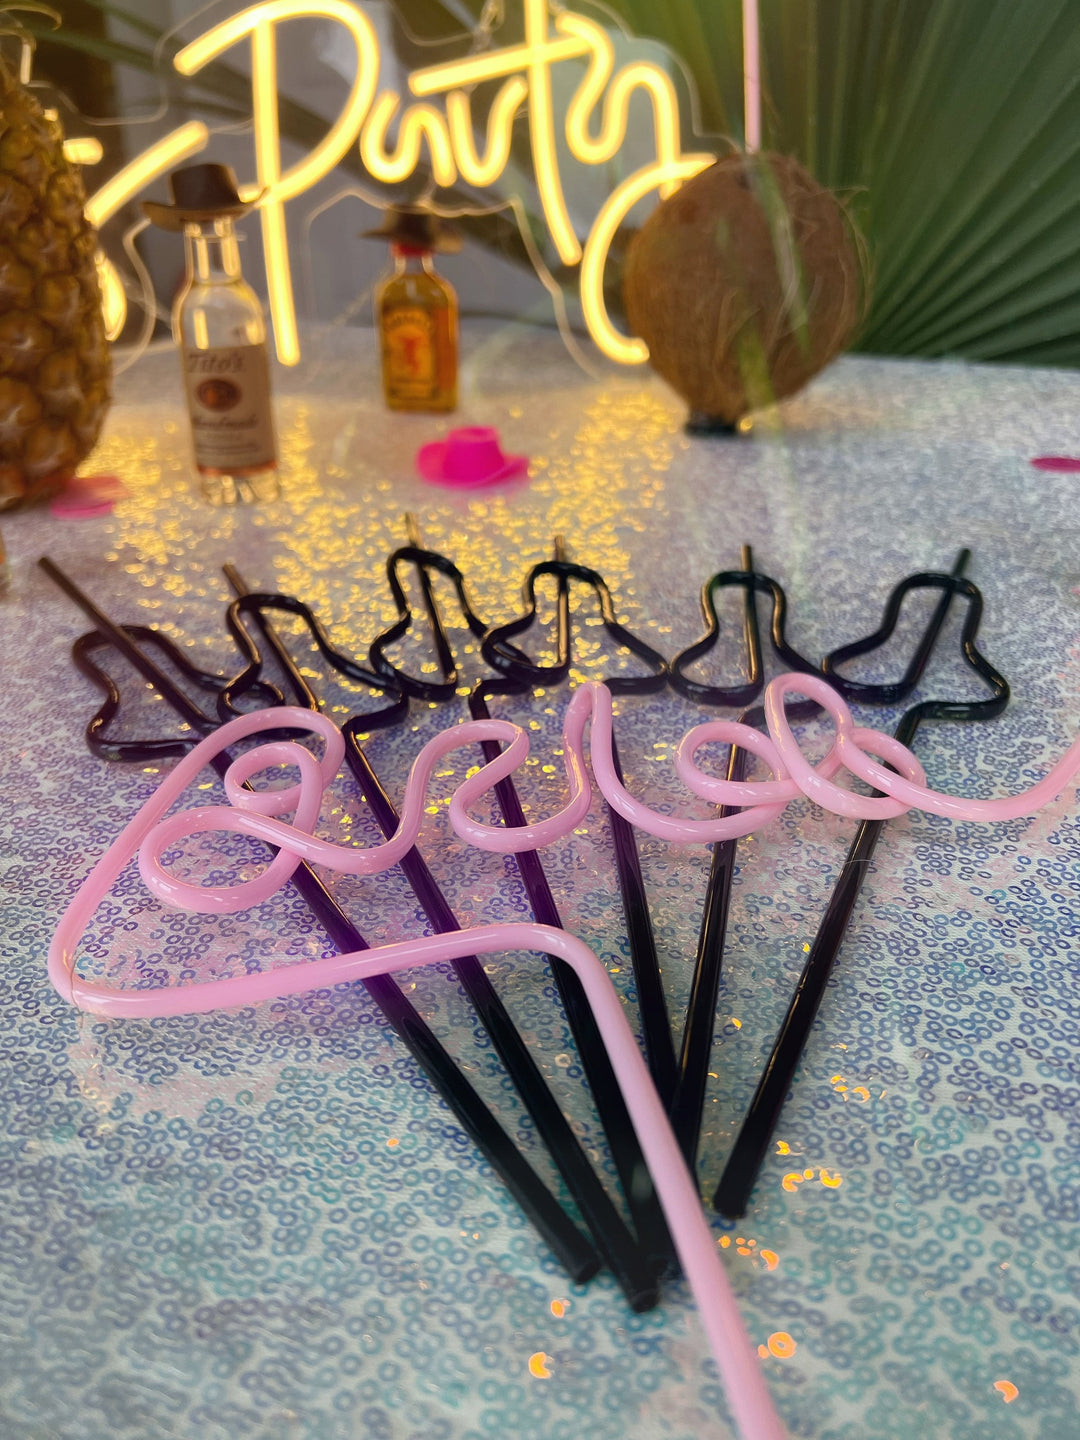 Bride Straw | Bride to be gift | Bridal Party Favors | disco bachelorette party | bachelorette gifts for bride | bride gift bulk